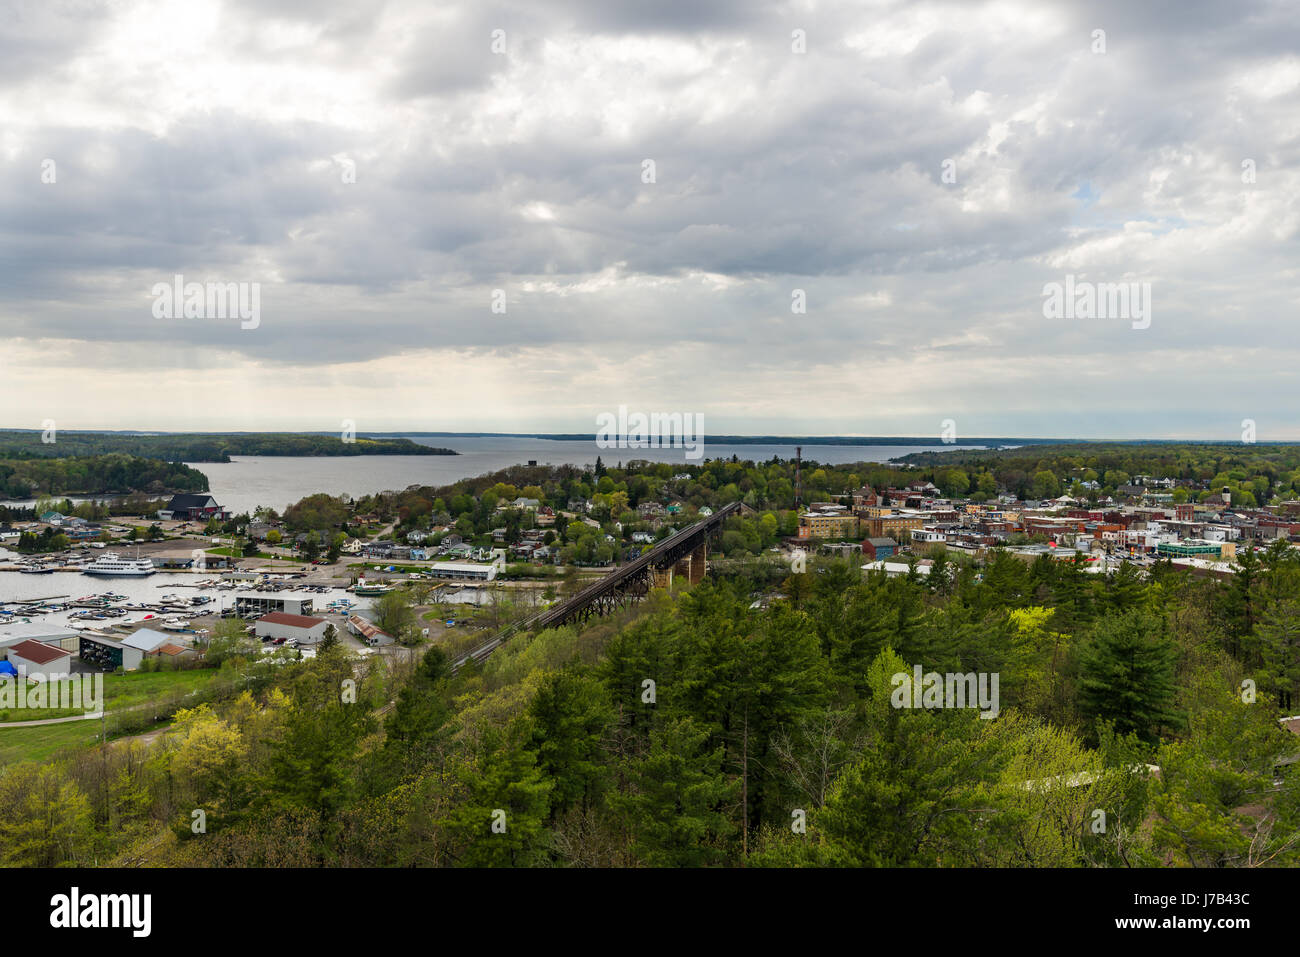 View Of Parry Sound From Tower, Ontario, Canada Stock Photo